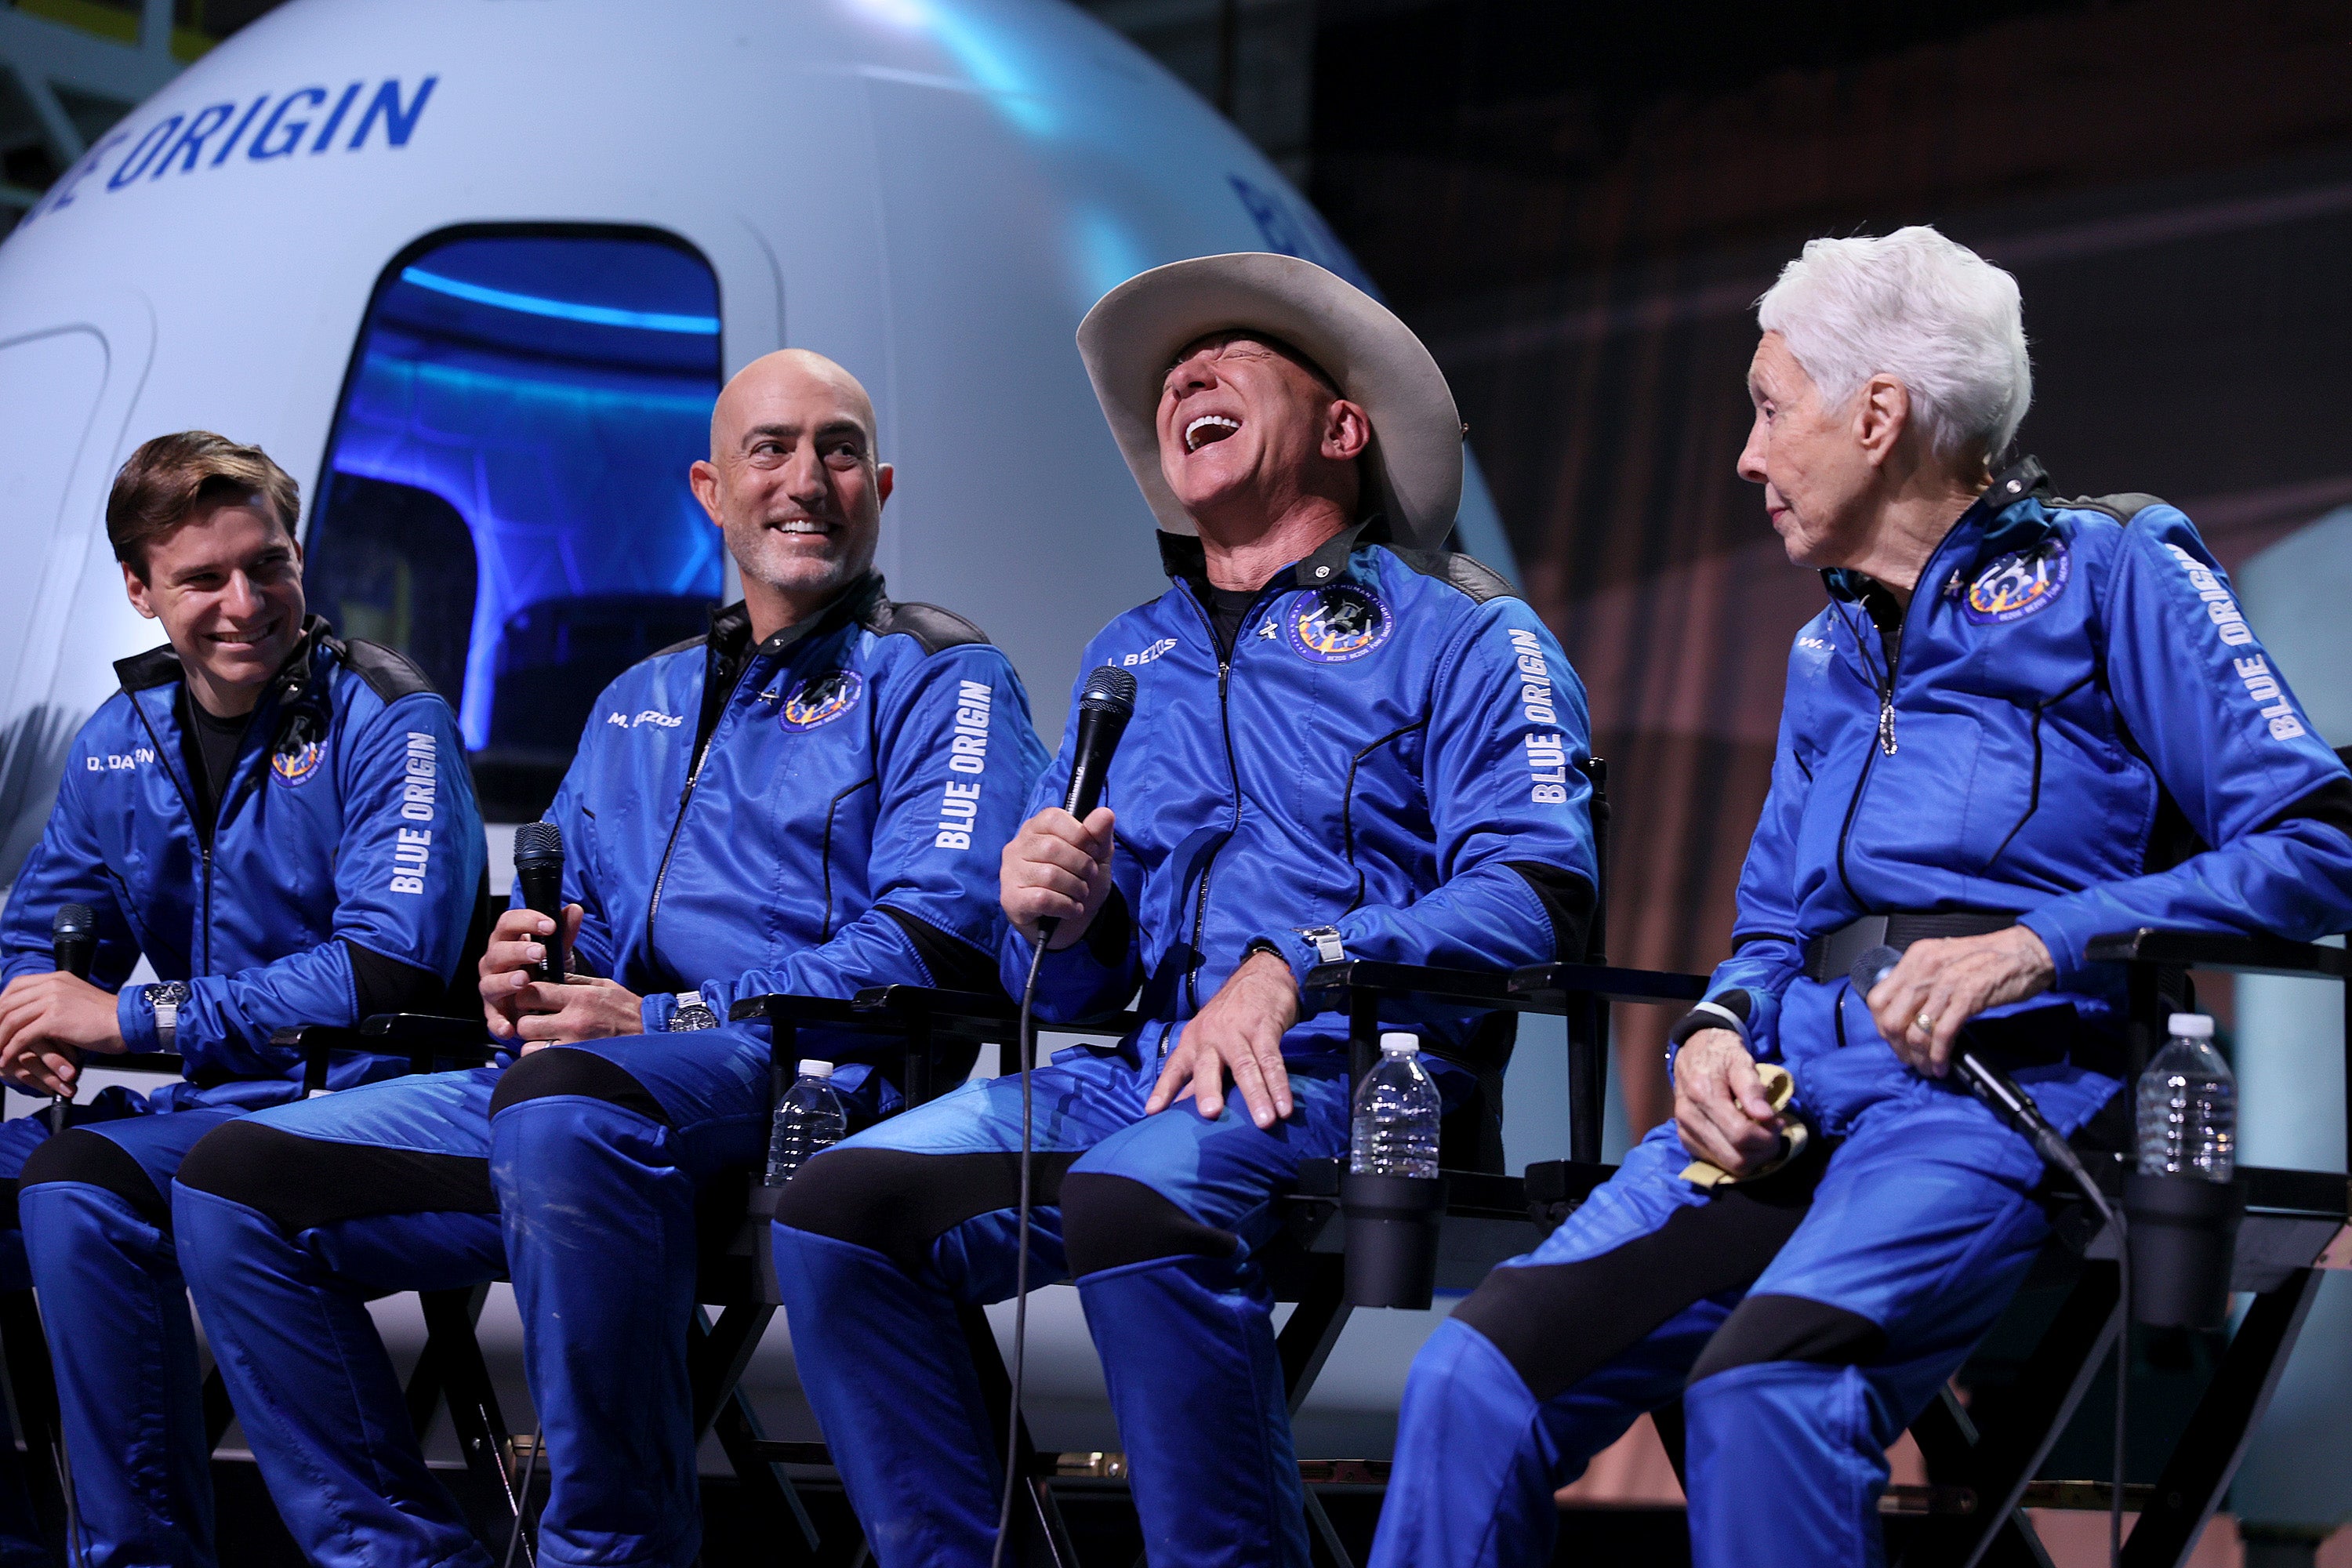 Blue Origin’s New Shepard crew (L-R) Oliver Daemen, Mark Bezos, Jeff Bezos, and Wally Funk hold a press conference after flying into space